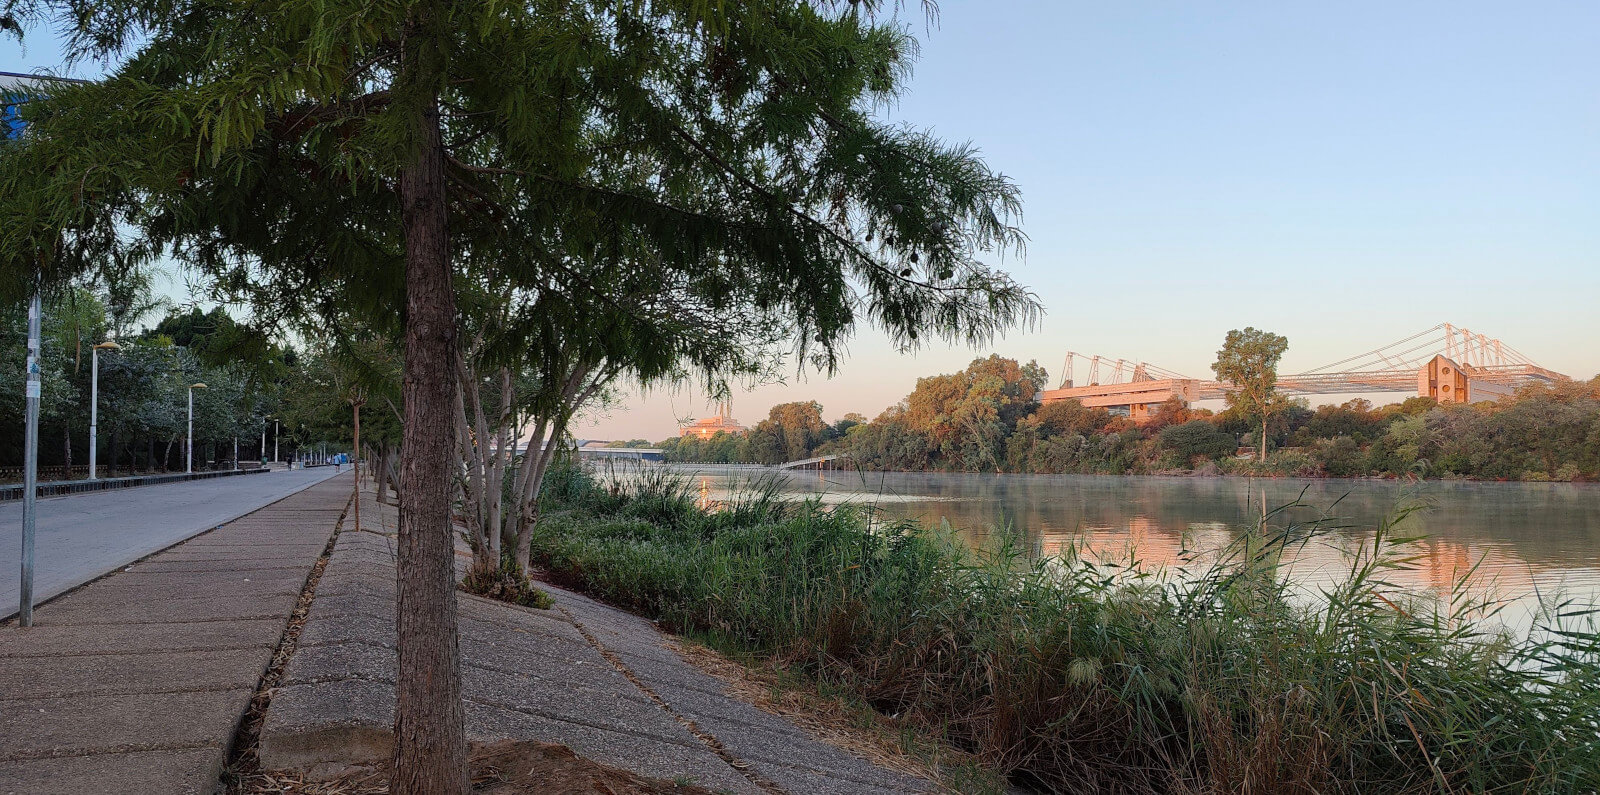 Photo of a tree at the side of the river in Sevilla, Spain